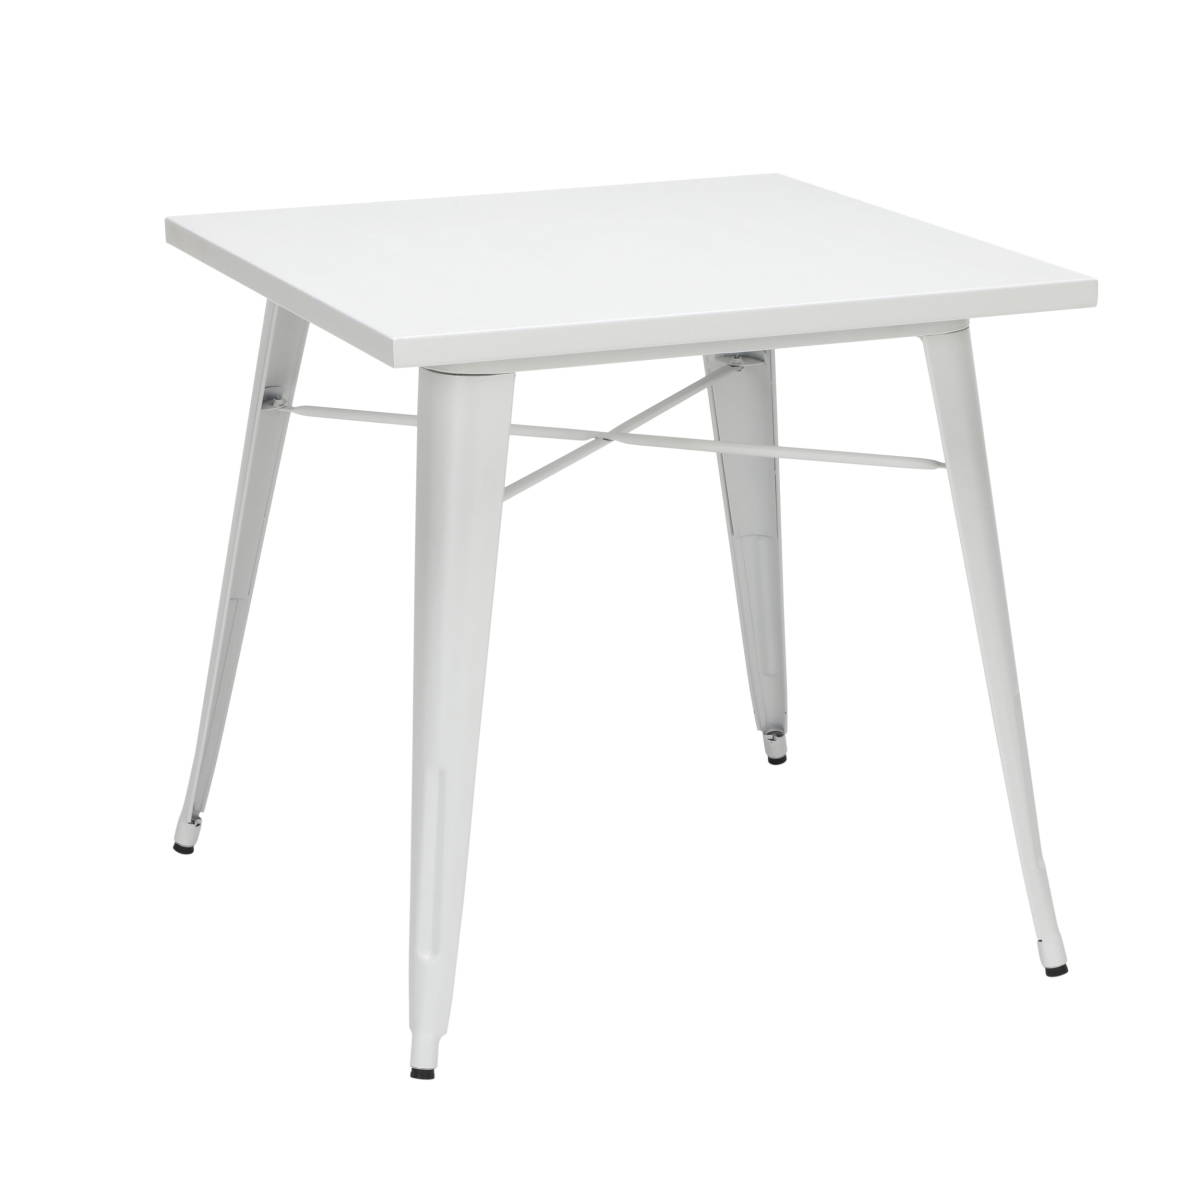 161-t30-wht 30 In. 161 Collection Industrial Modern Square Dining Table, Galvanized Steel Indoor & Outdoor Table - White